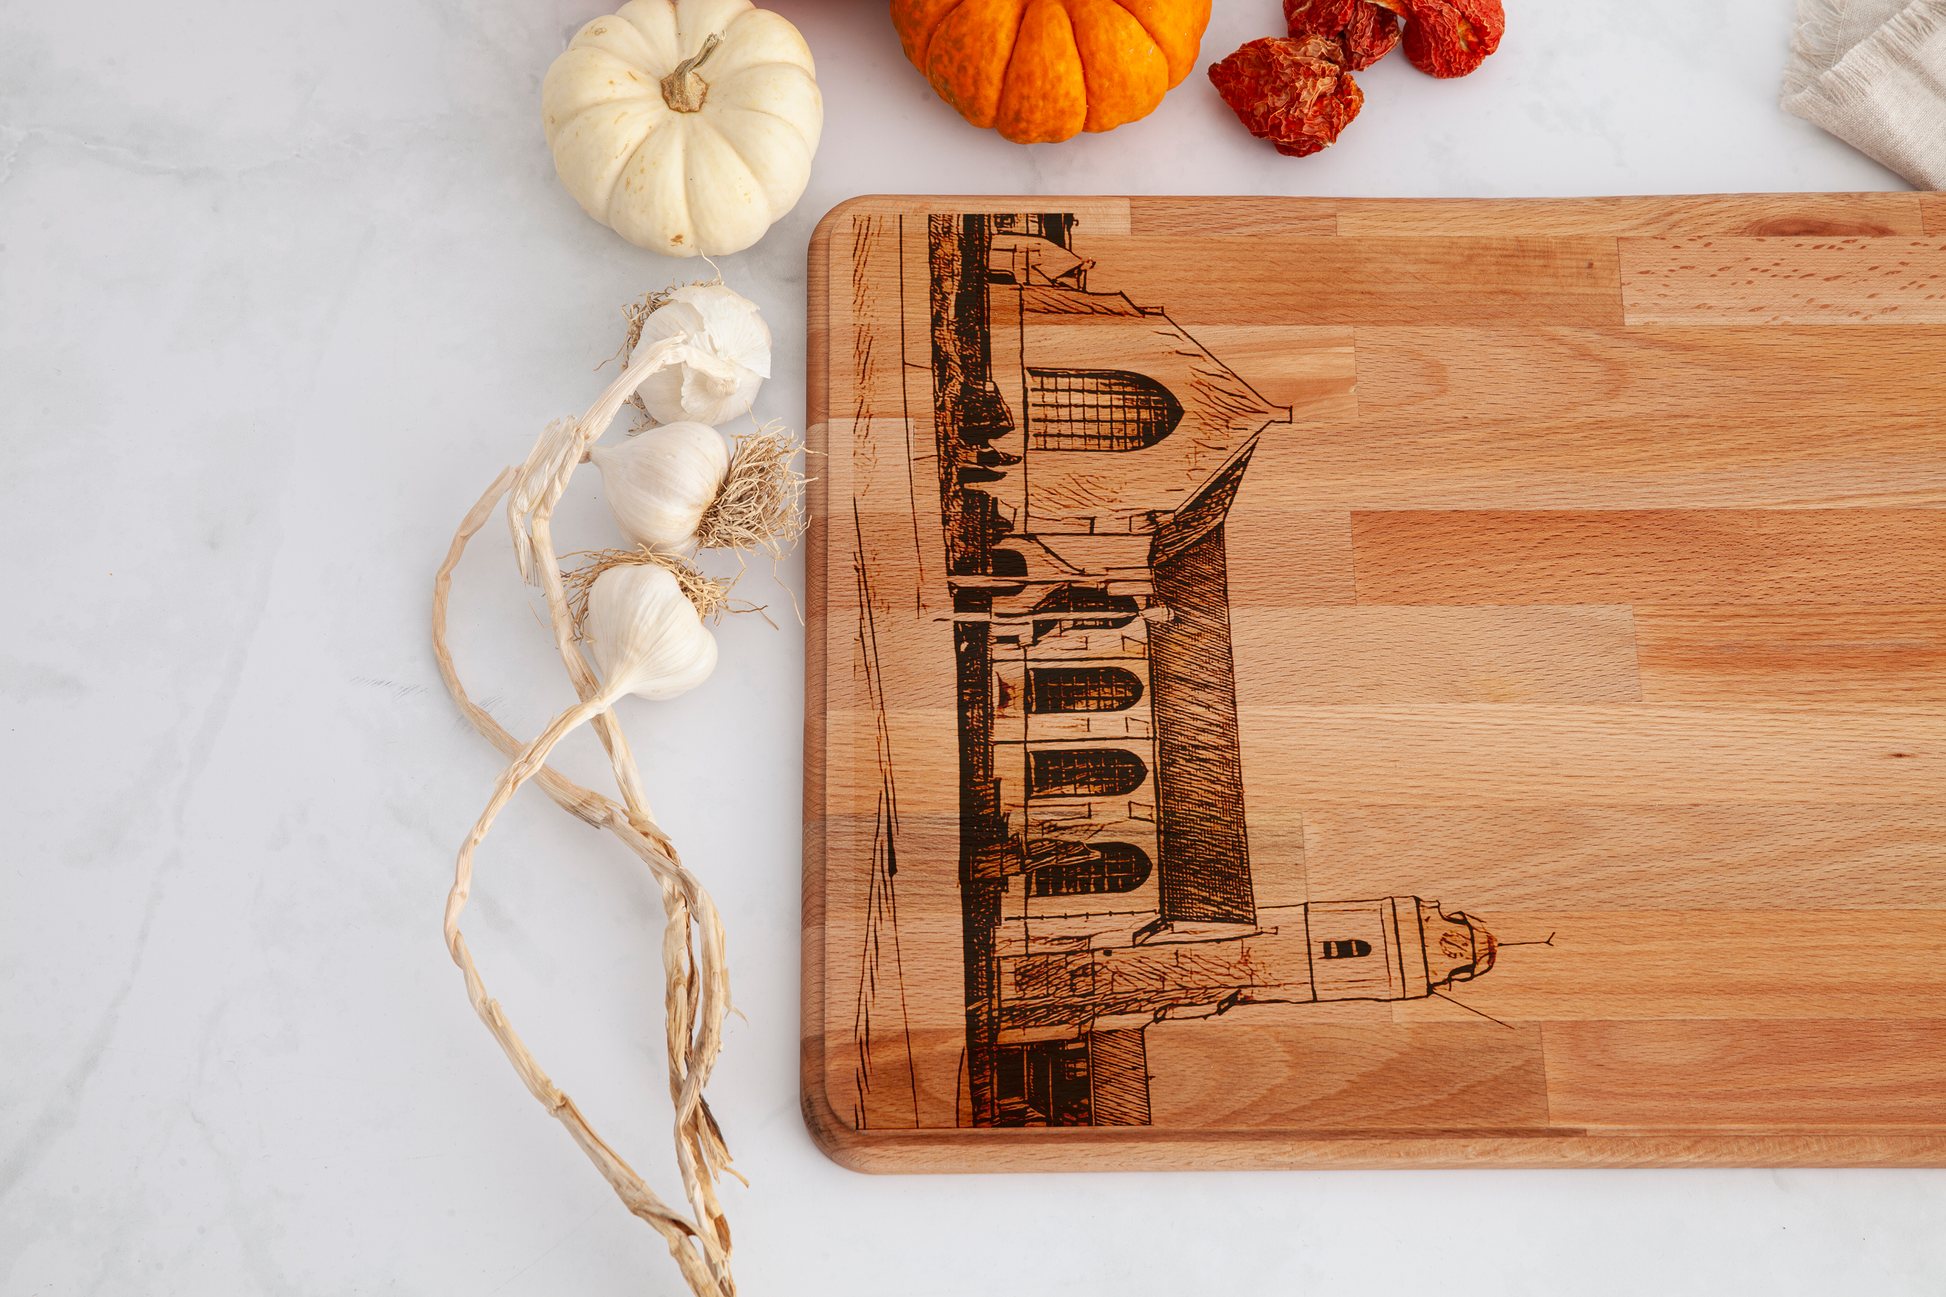 Katwijk, Andreaskerk, cutting board, antimicrobial